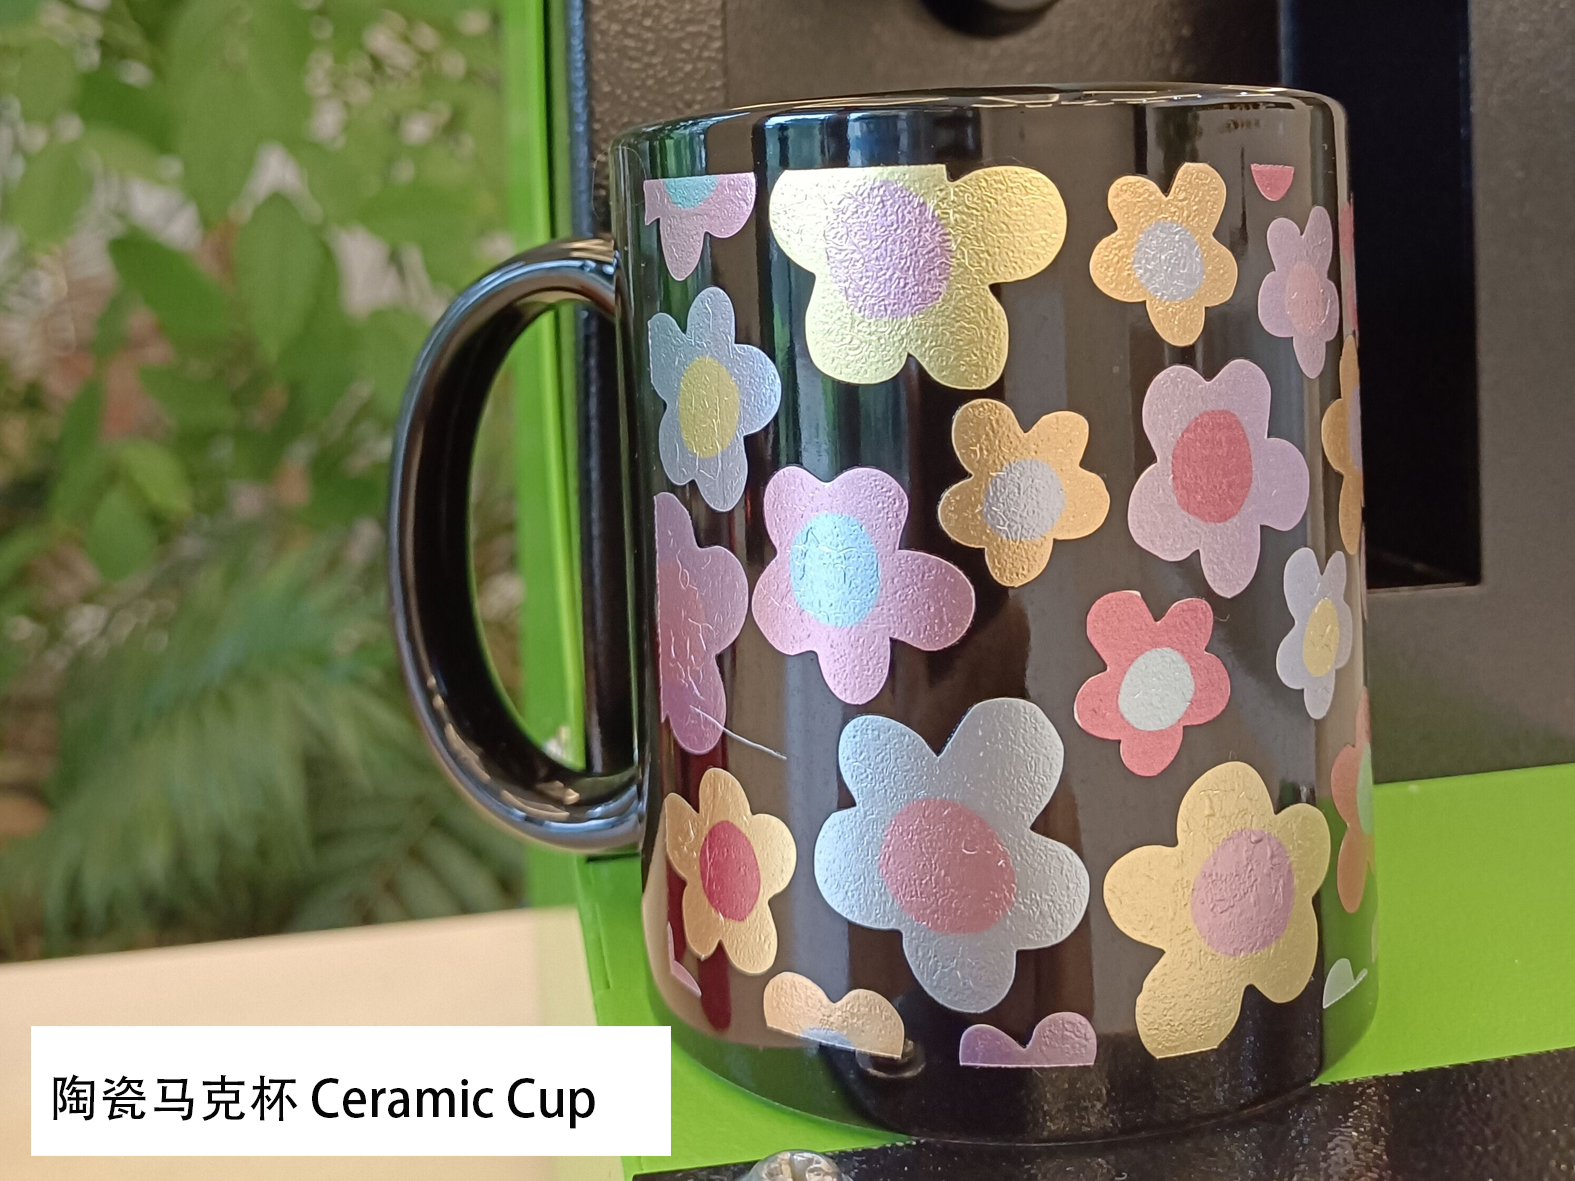 https://www.alizarइंचina.com/solutions/ Which-investment-is-best-for-beginner-to-make-the-colorful-logo-of-ceramic-mug/